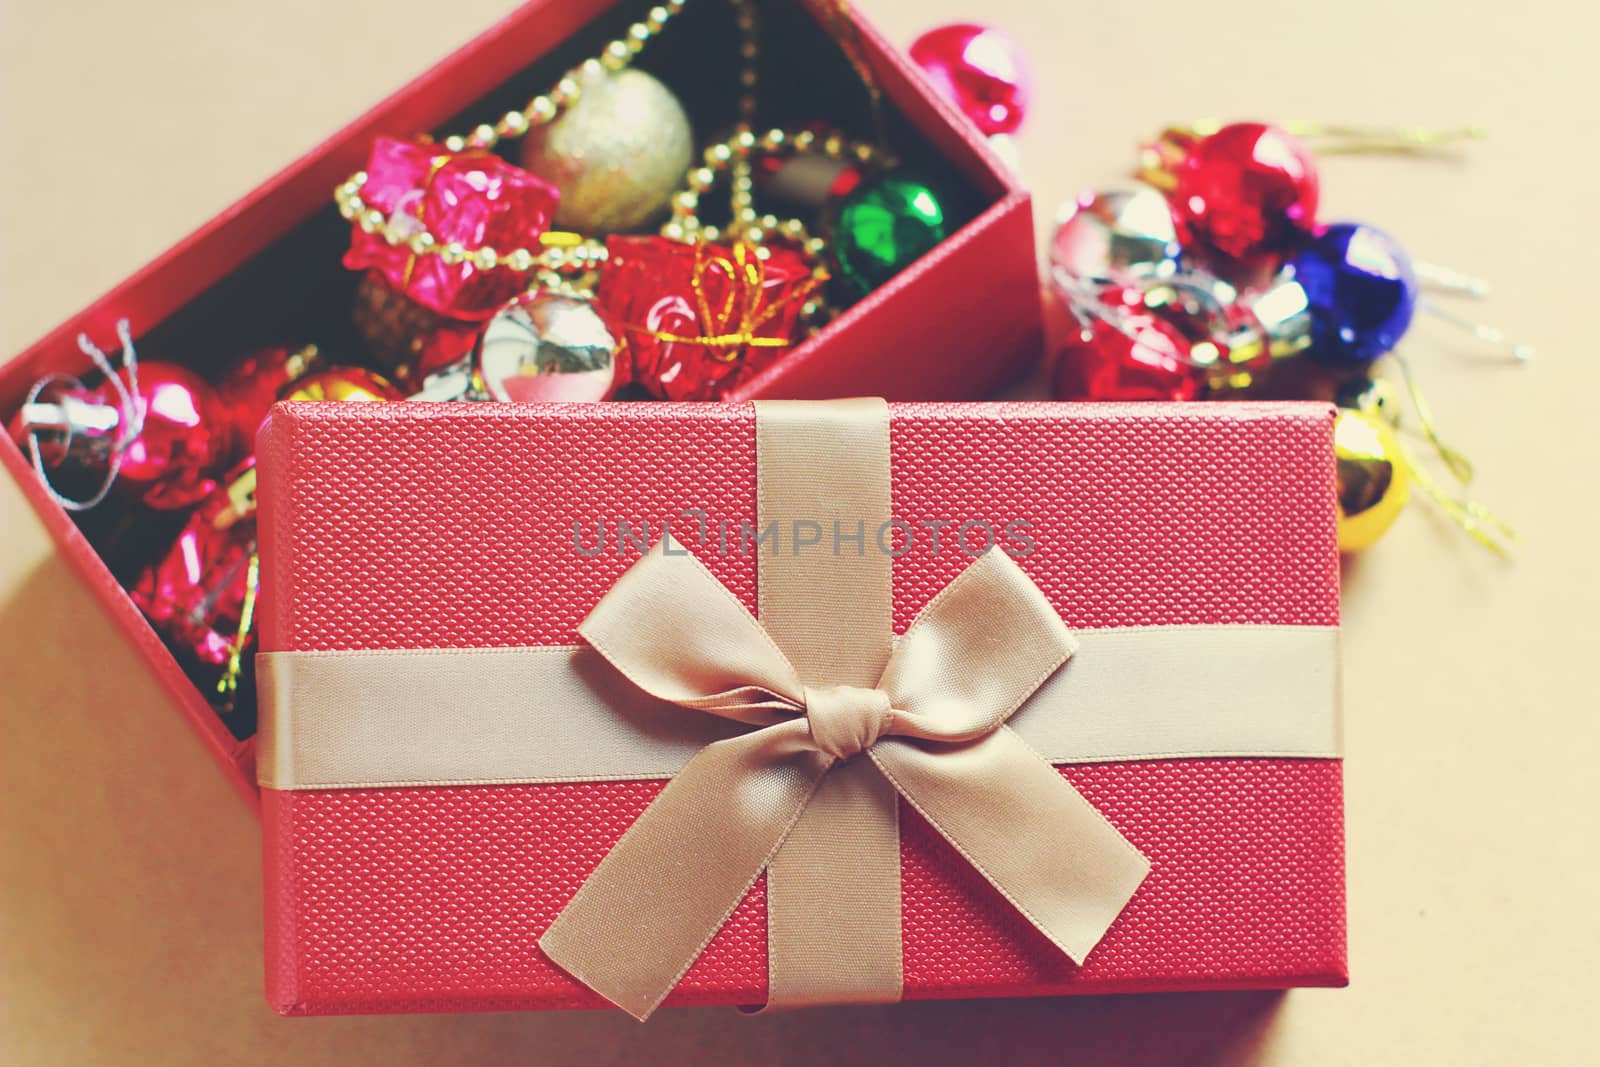 Gift red box contain with christmas ornament, retro filter effect